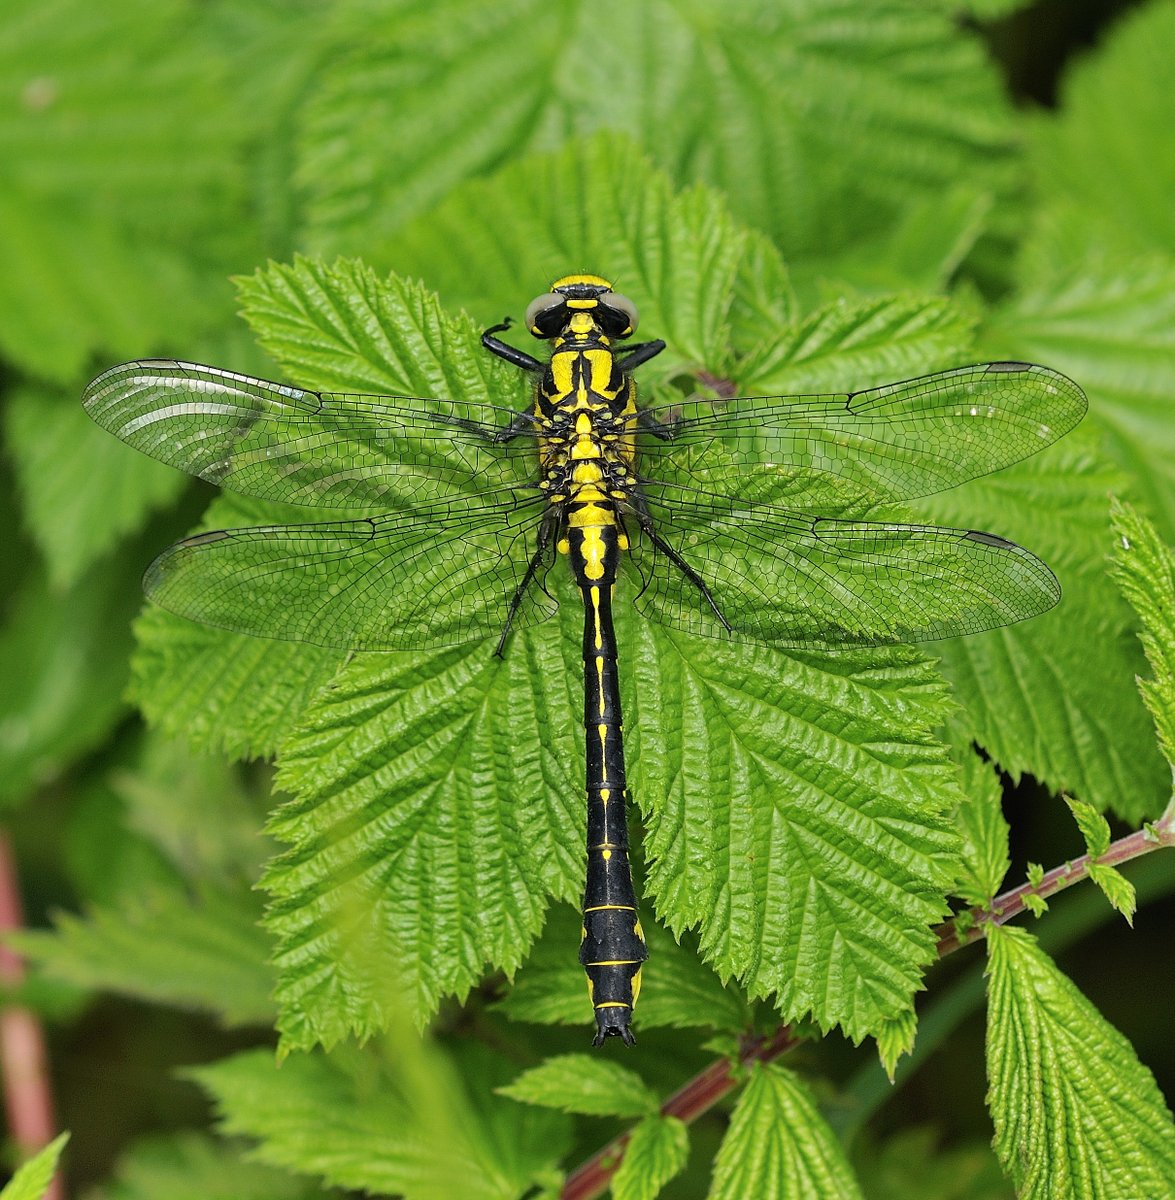 From the BDS Spring Meeting 2024 playlist, watch an introduction to the Monmouthshire 2030 Dragonfly Atlas Project, by Steve Preddy, Monmouthshire County Dragonfly Recorder: loom.ly/yVDFR1o 📸Common Clubtail by G.W.Tonks